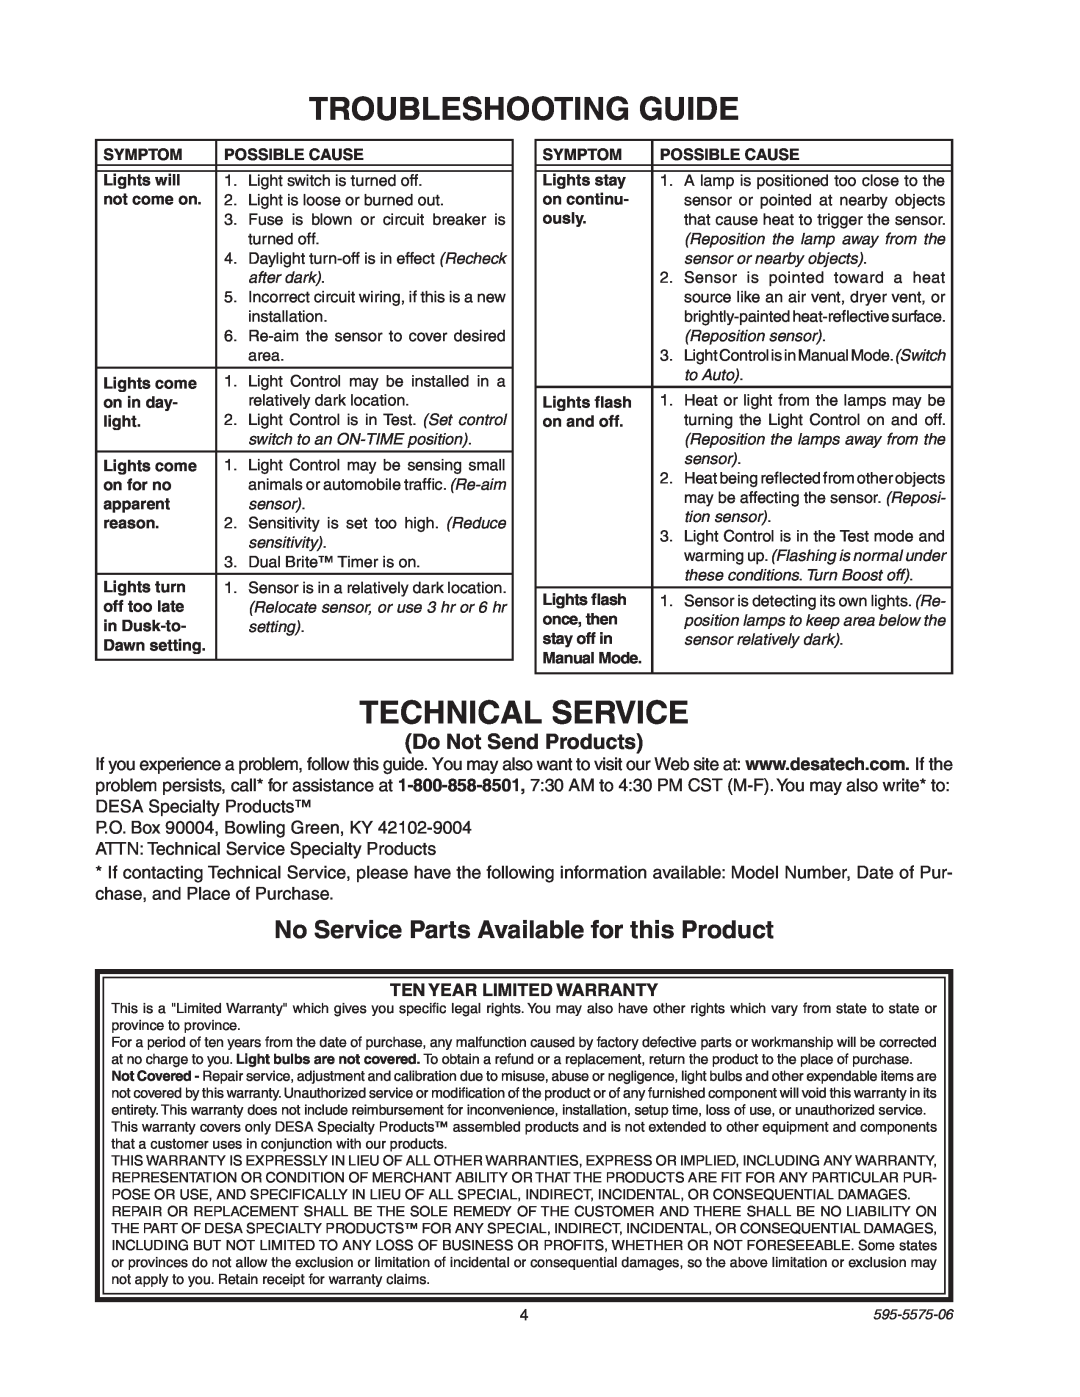 Desa SL-5512 Troubleshooting Guide, Technical Service, No Service Parts Available for this Product, Do Not Send Products 